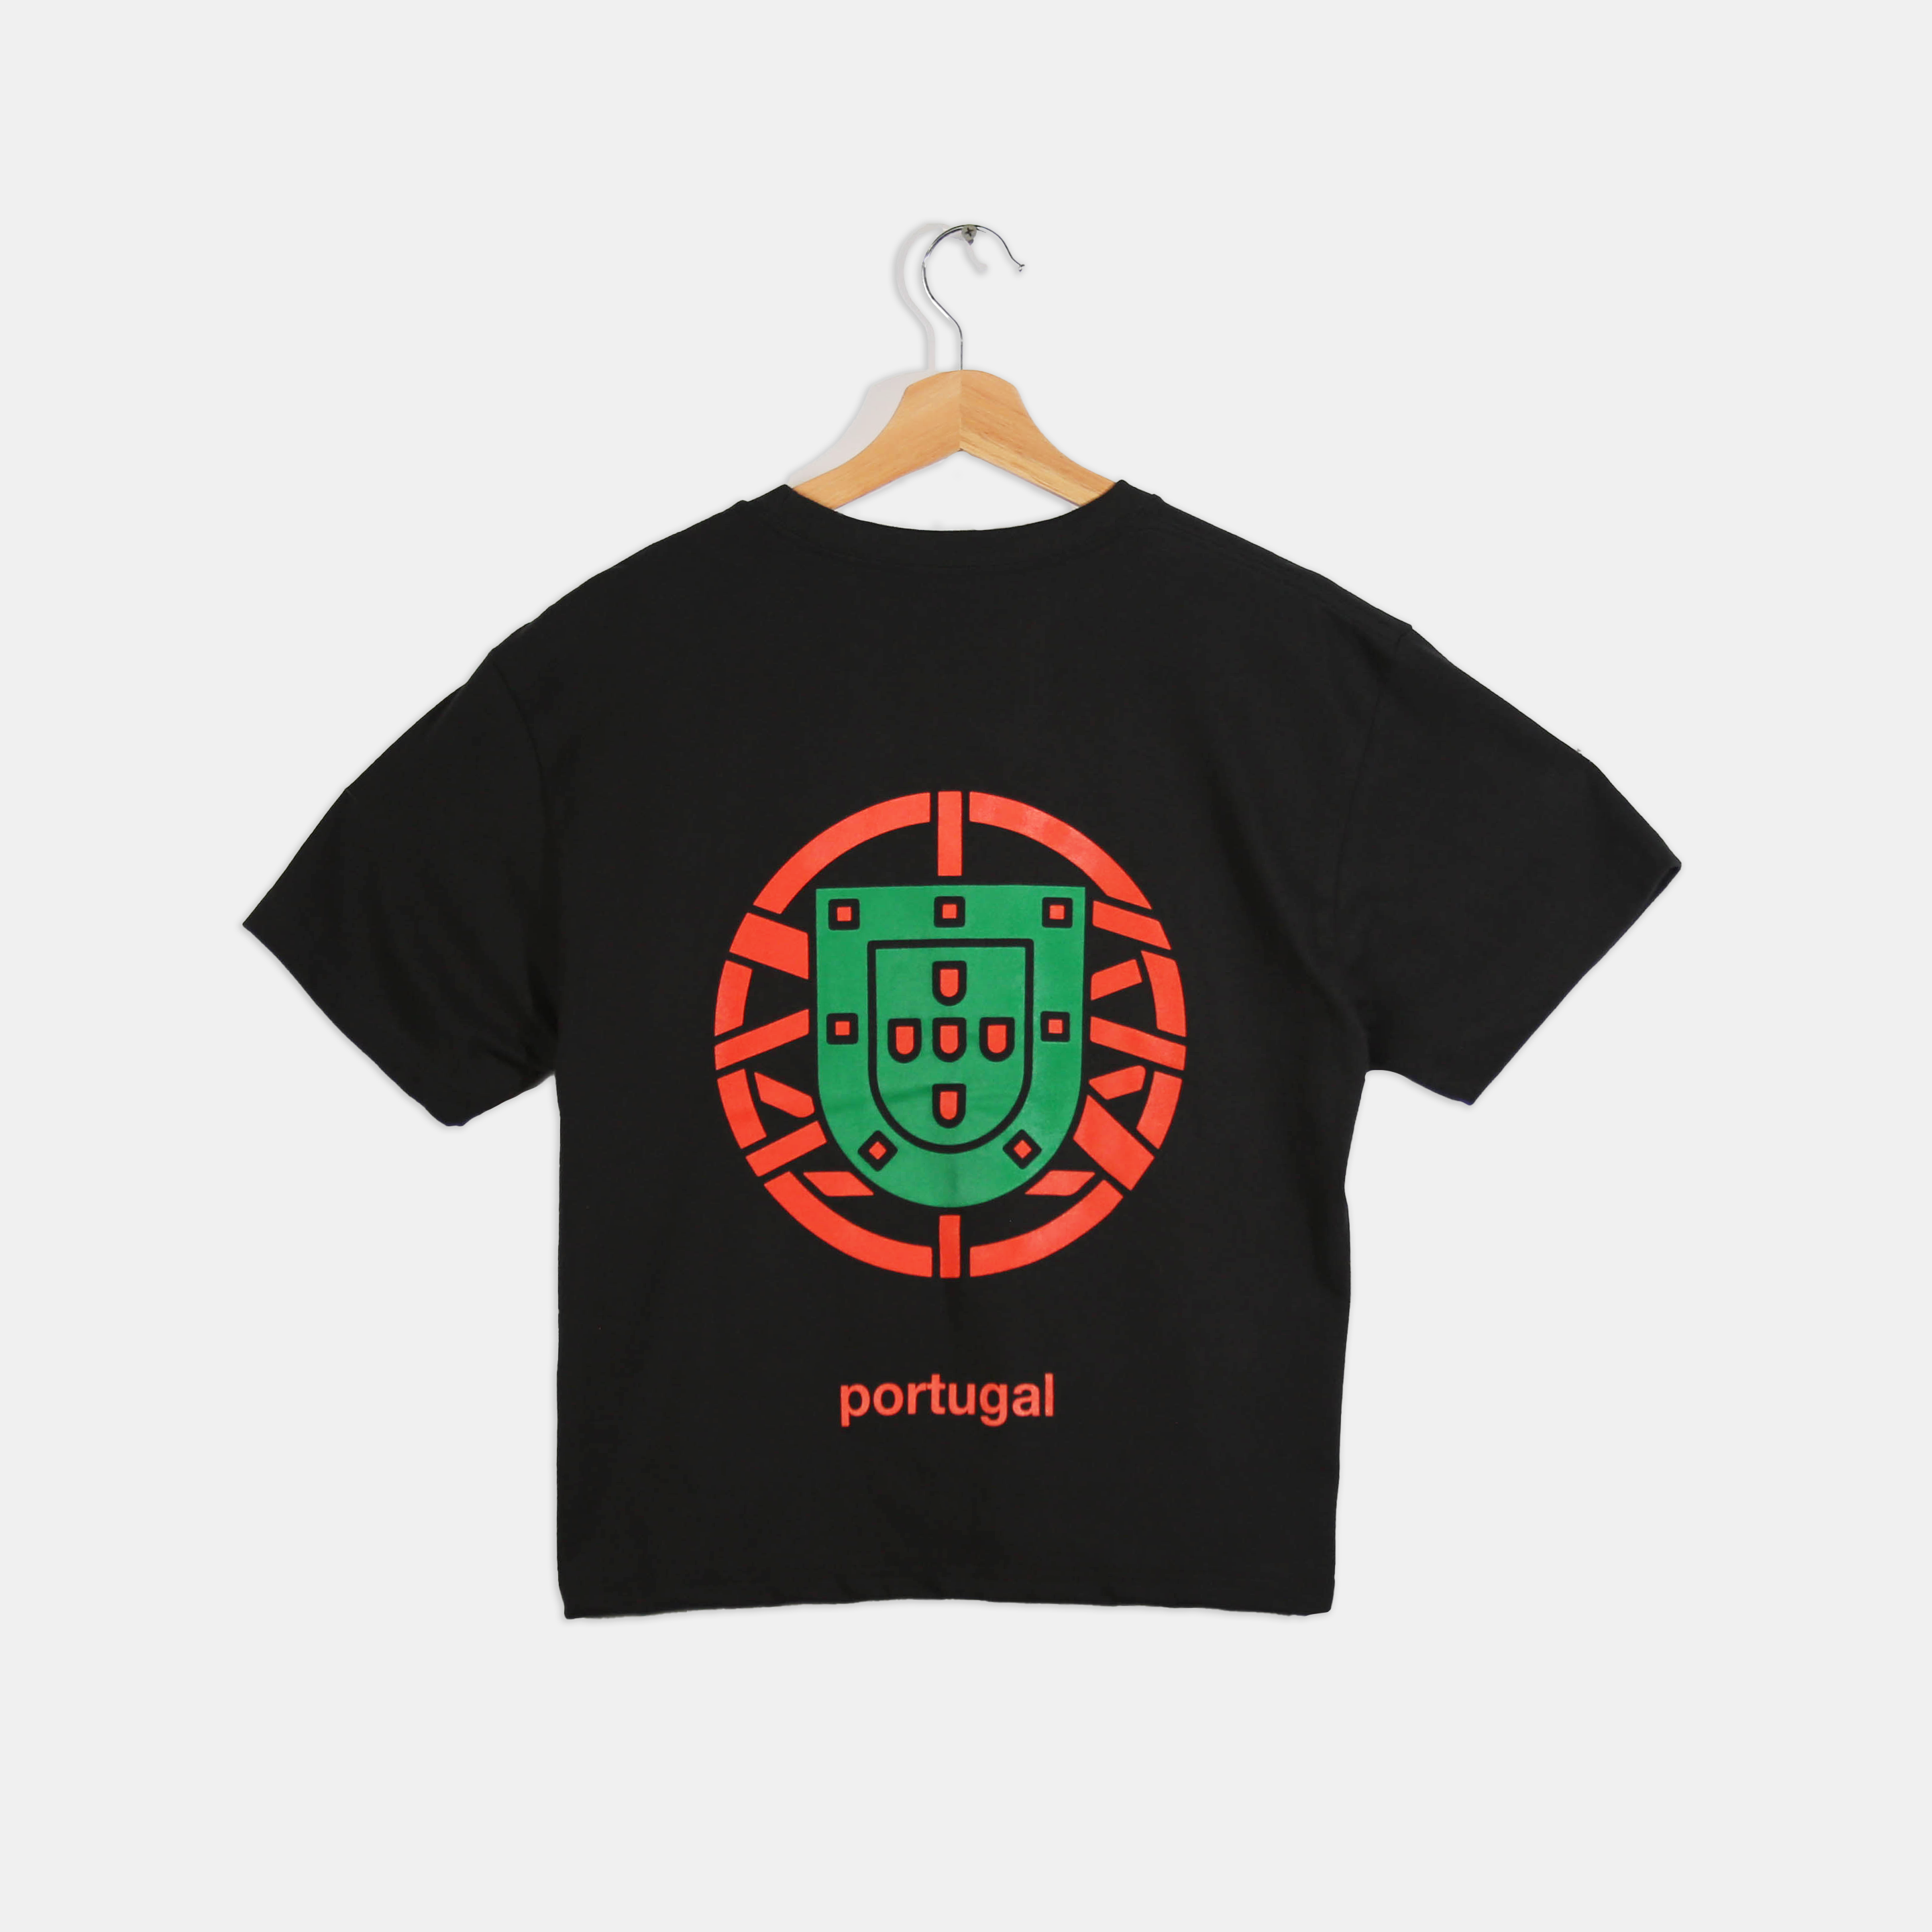 "Unofficial" Portugal Cropped Tee